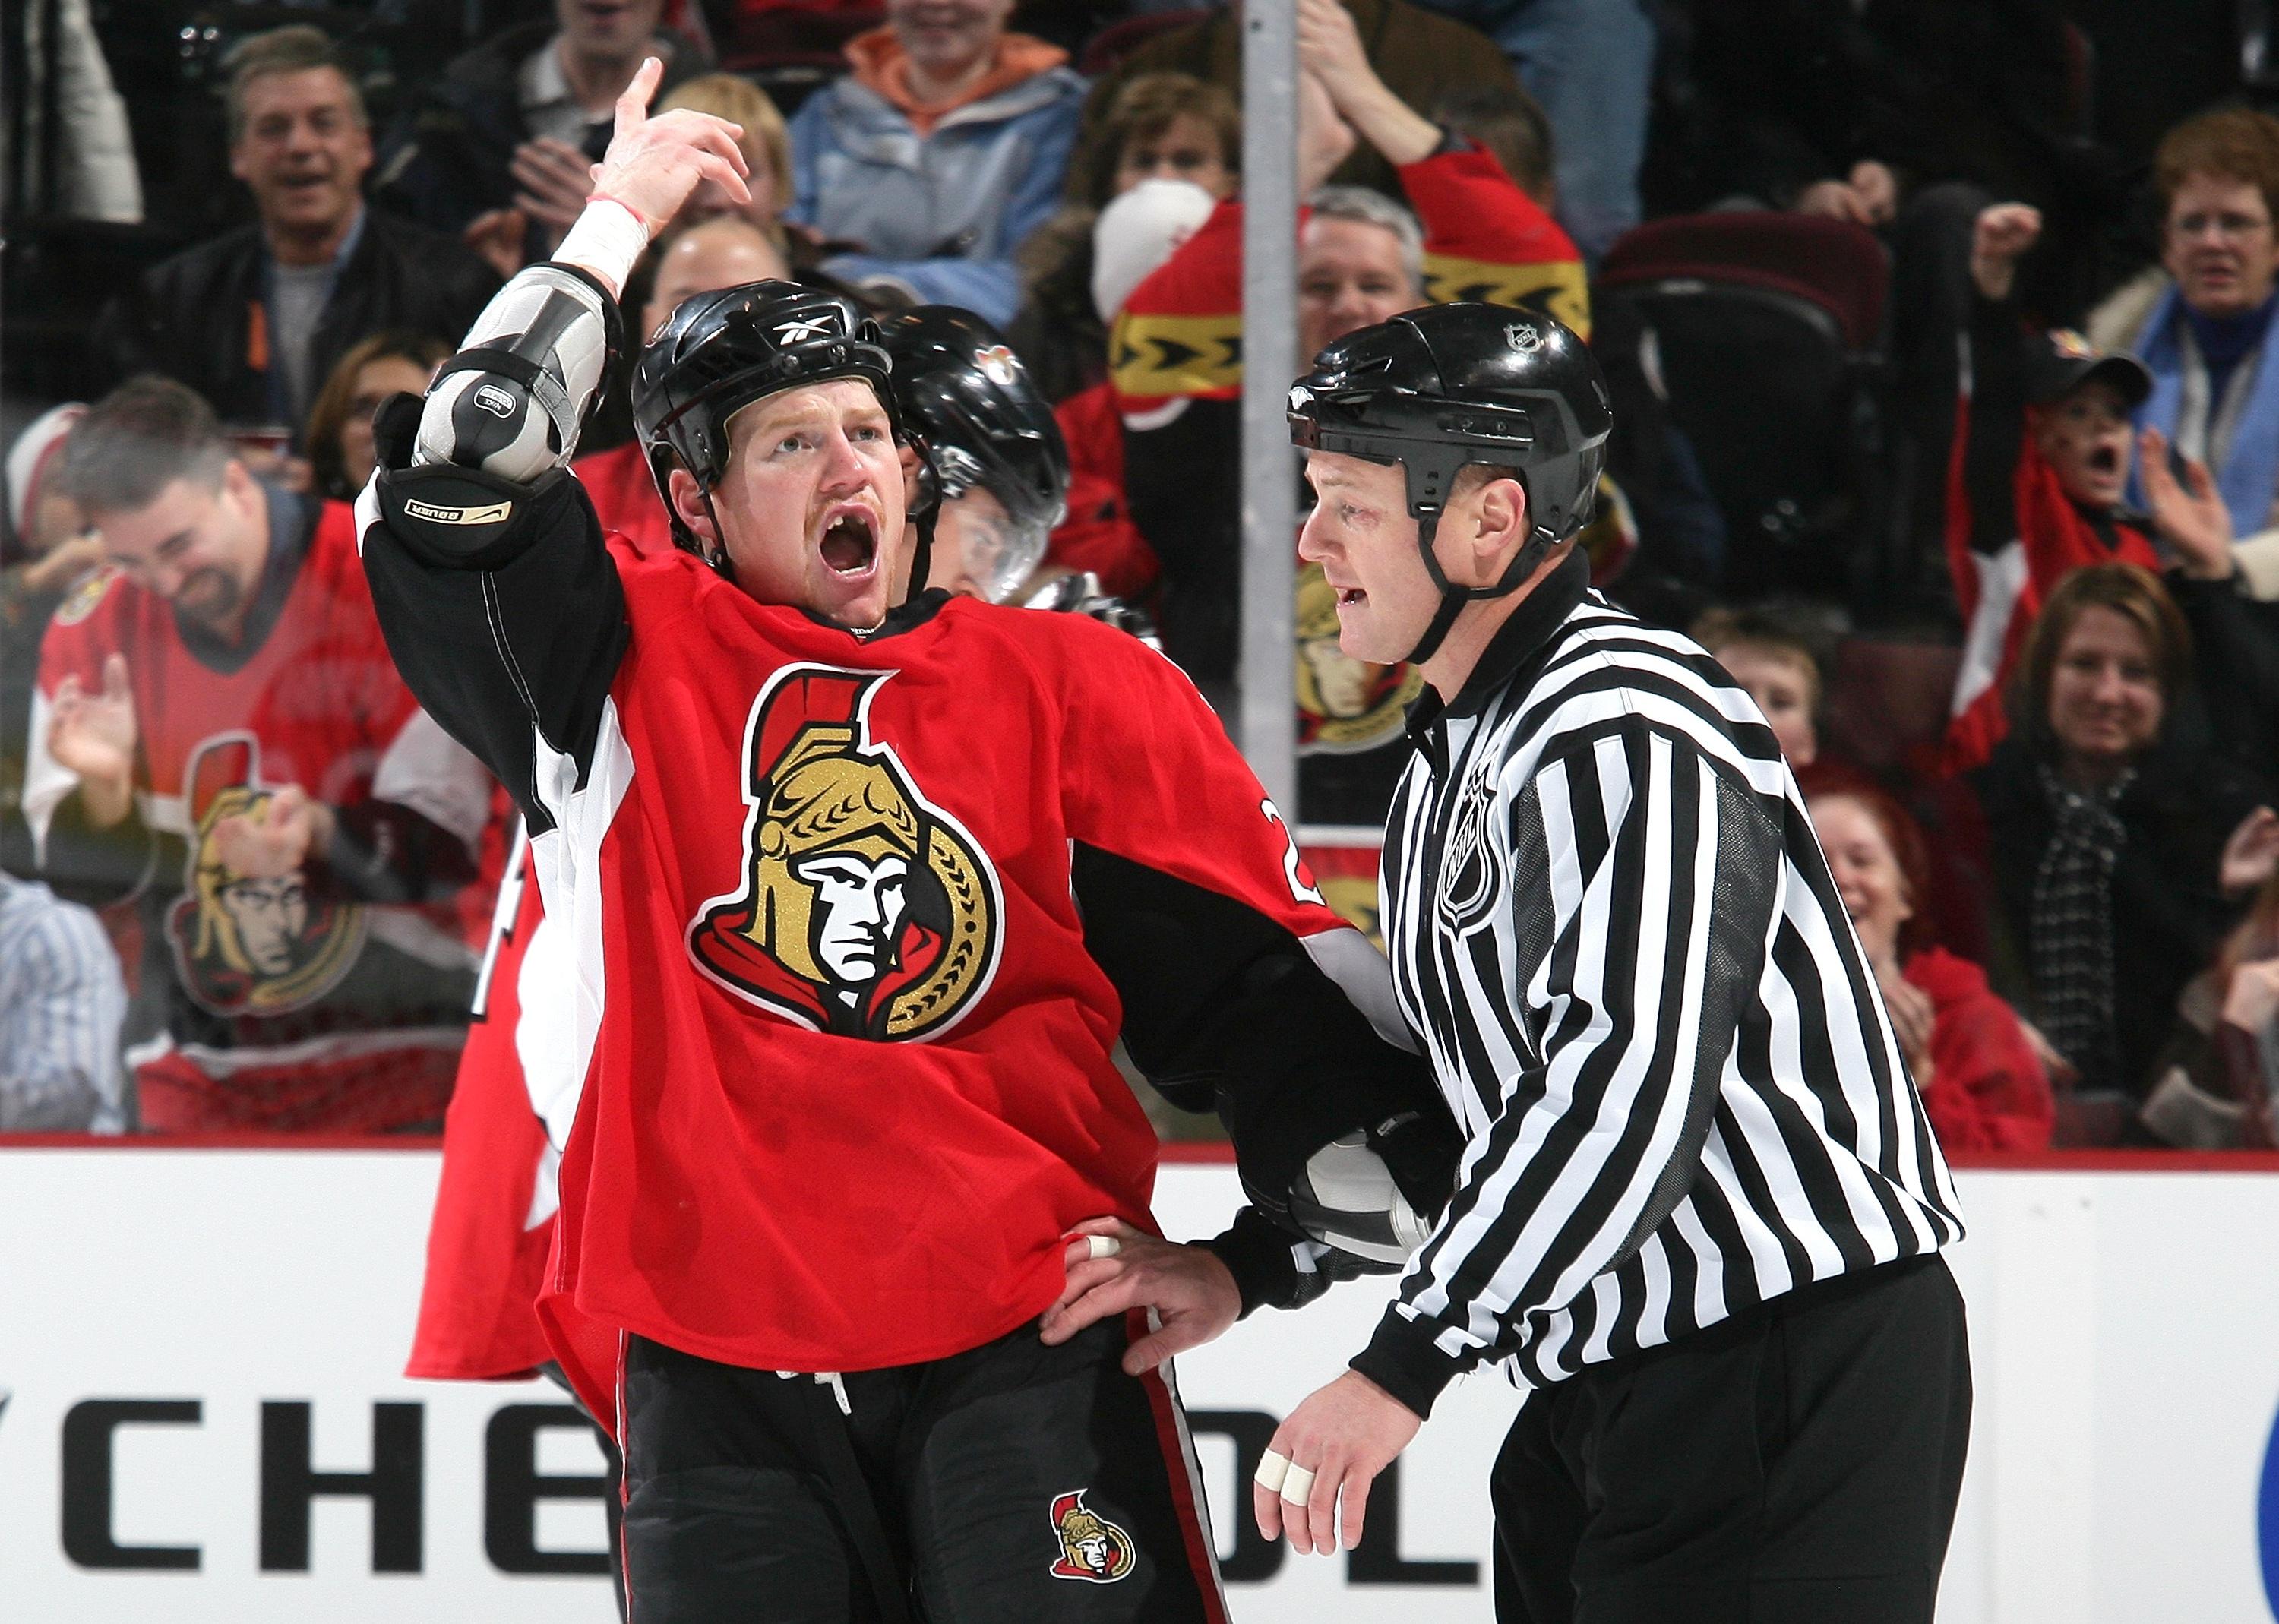 Chris Neil gestures to pump up the crowd after a fight.